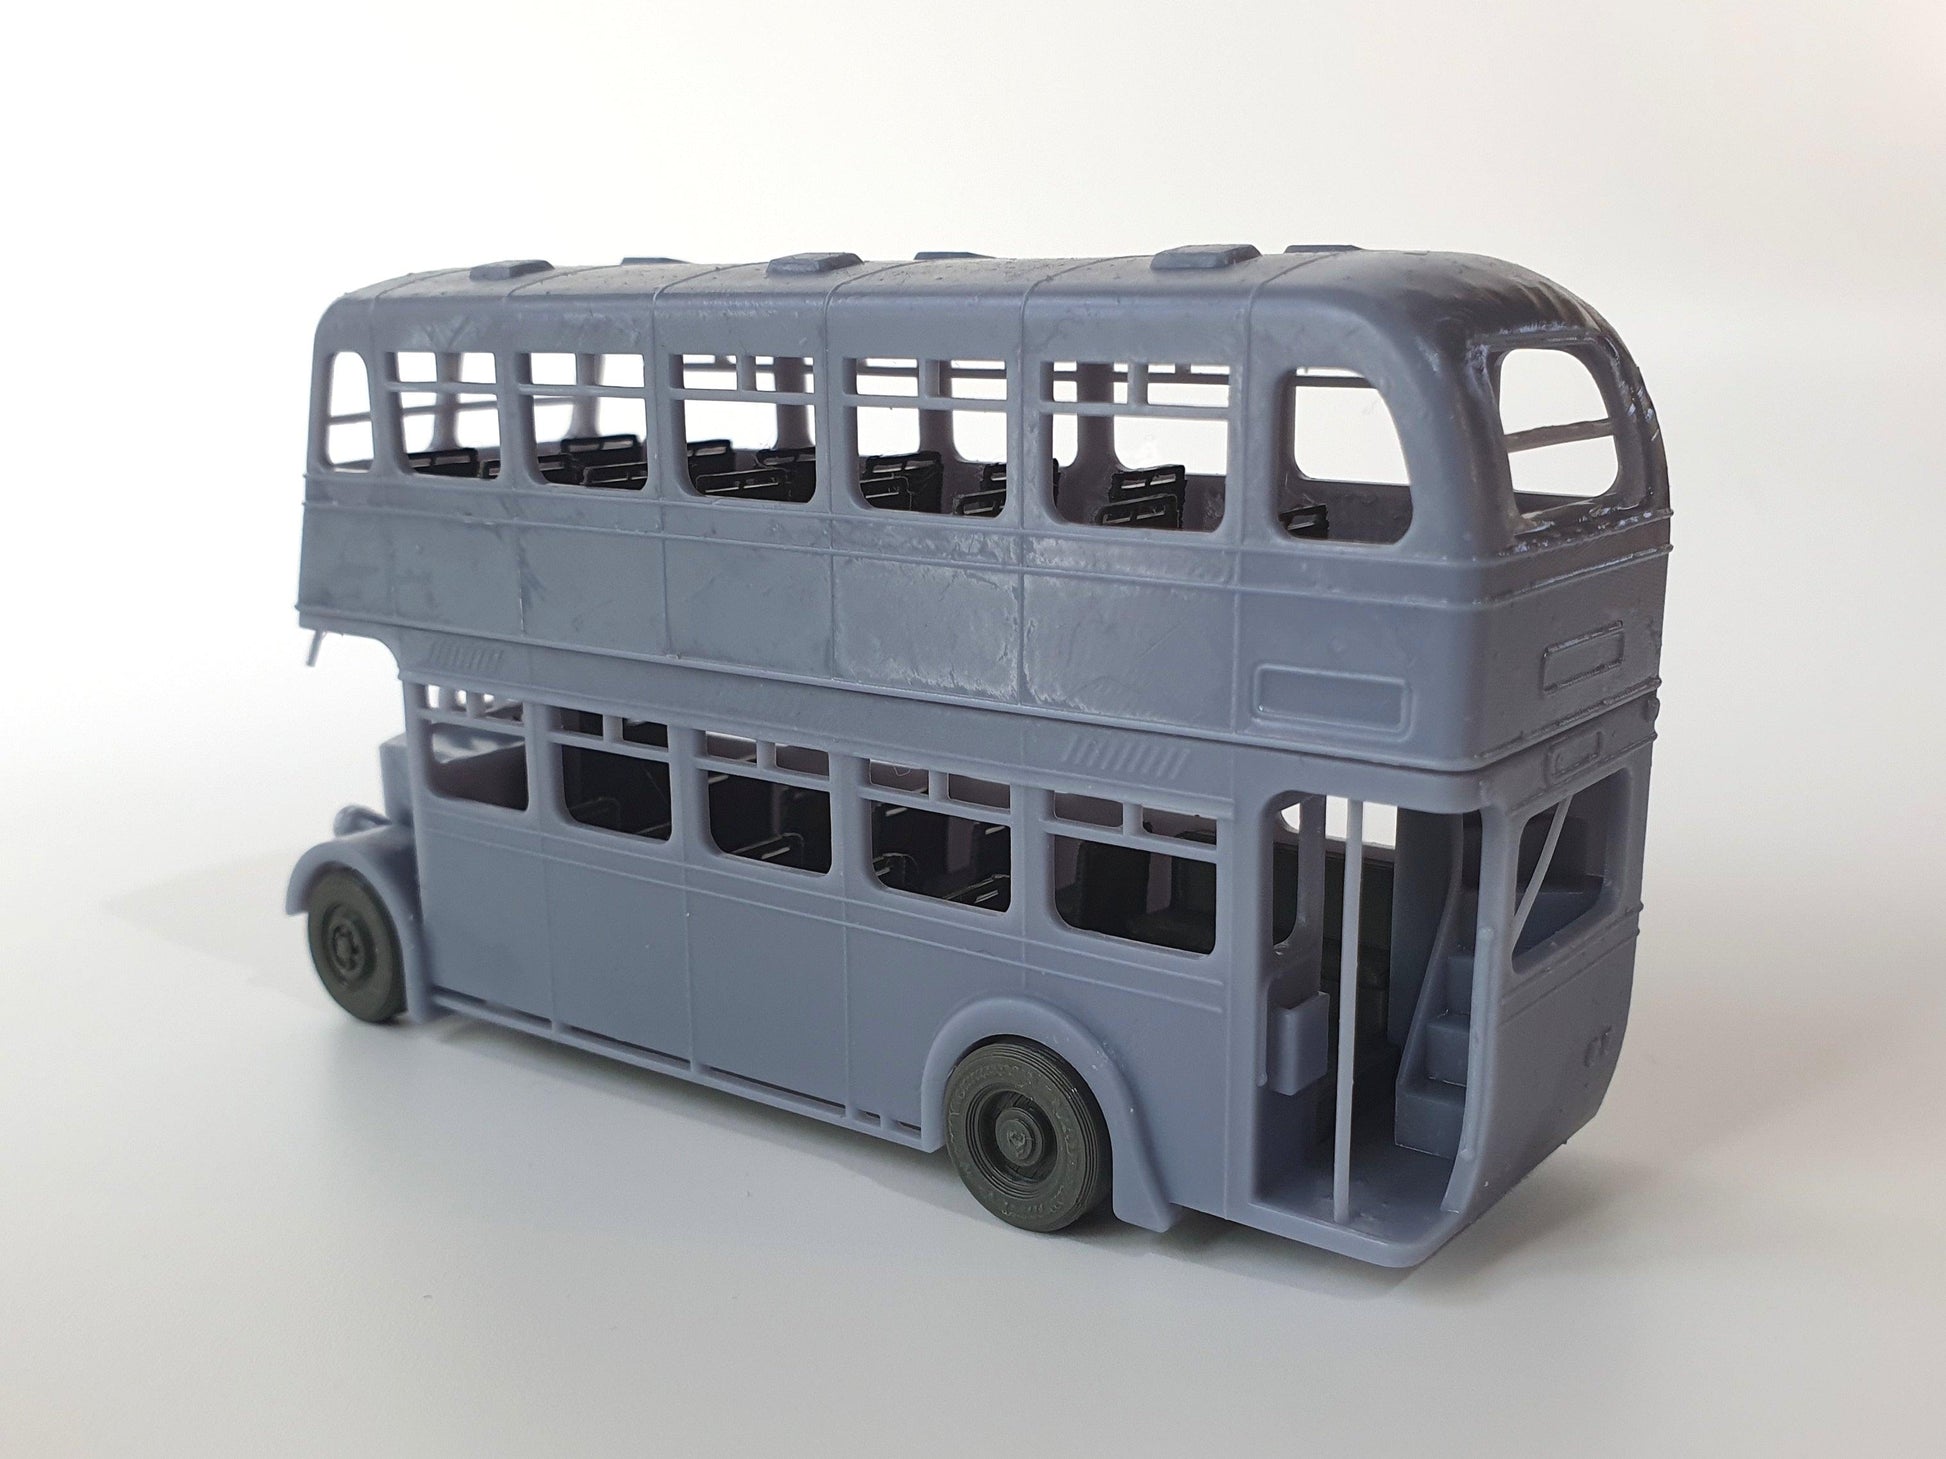 OO (1:76) scale model of a Coventry Maudslay Regent bus viewed from the rear - Three Peaks Models